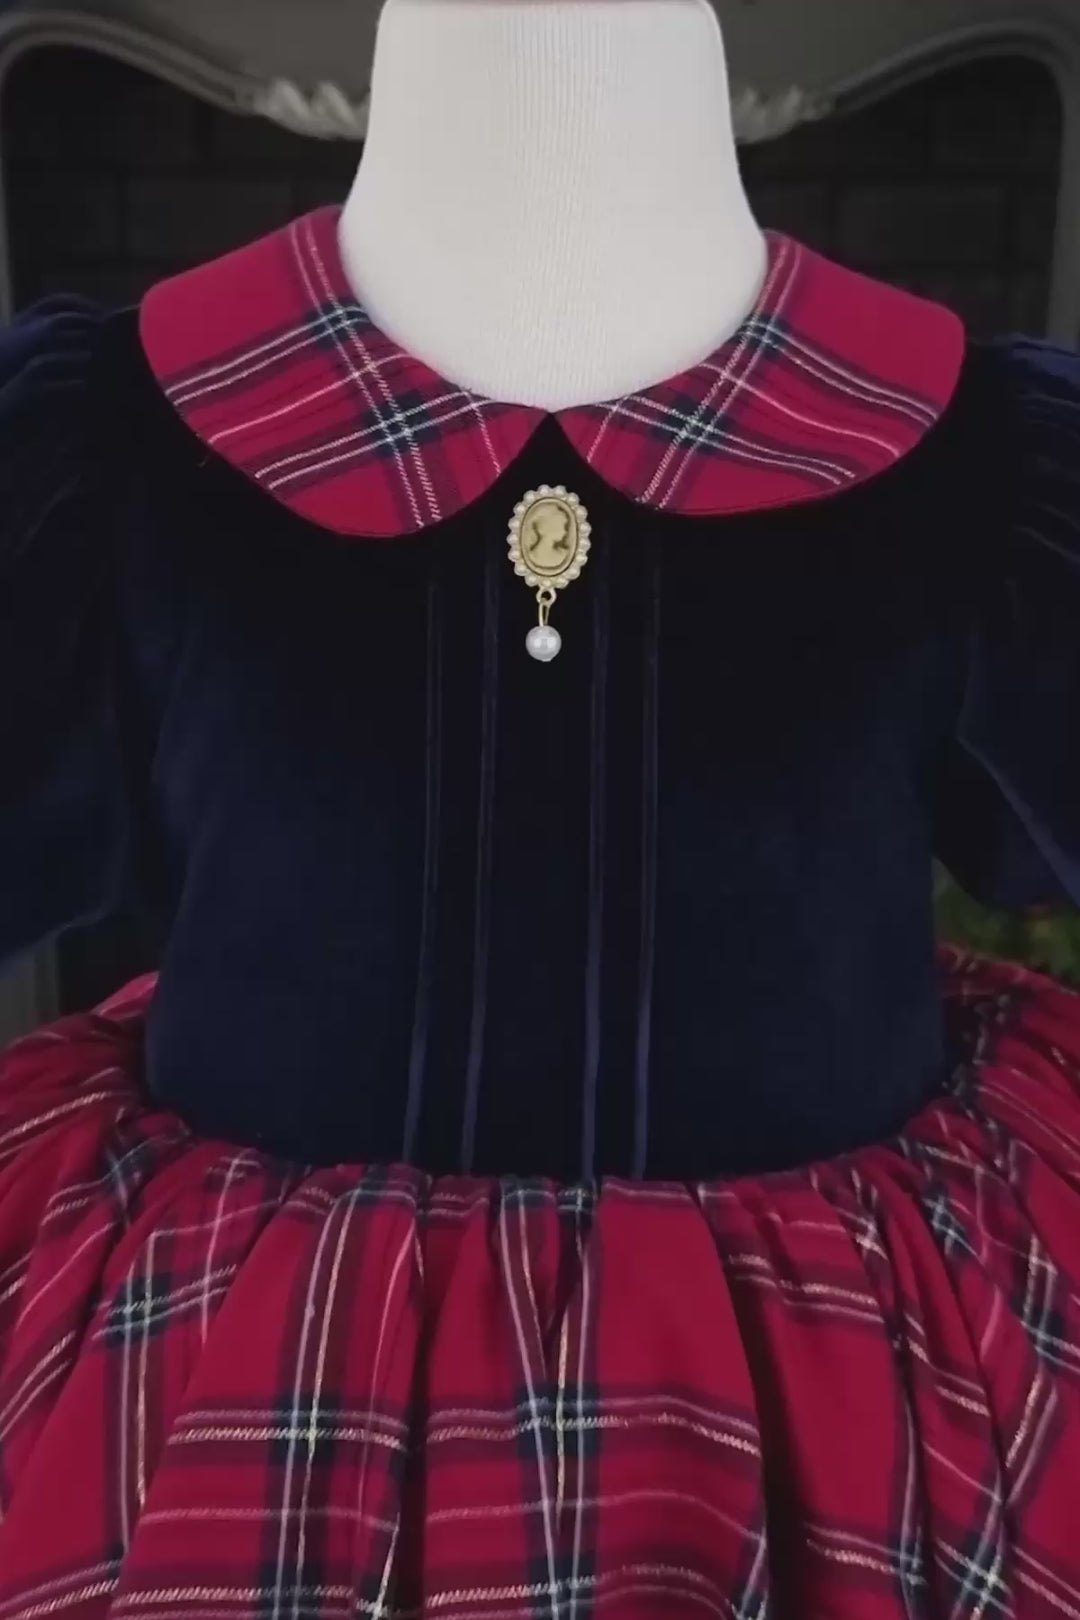 360° view of a navy blue velvet Christmas dress that has plaid skirt, balloon arm, baby collar and brooch.